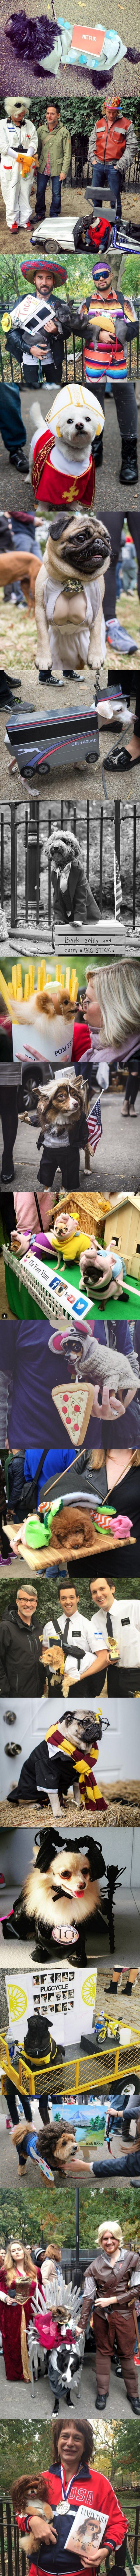 dog costumes funny picture